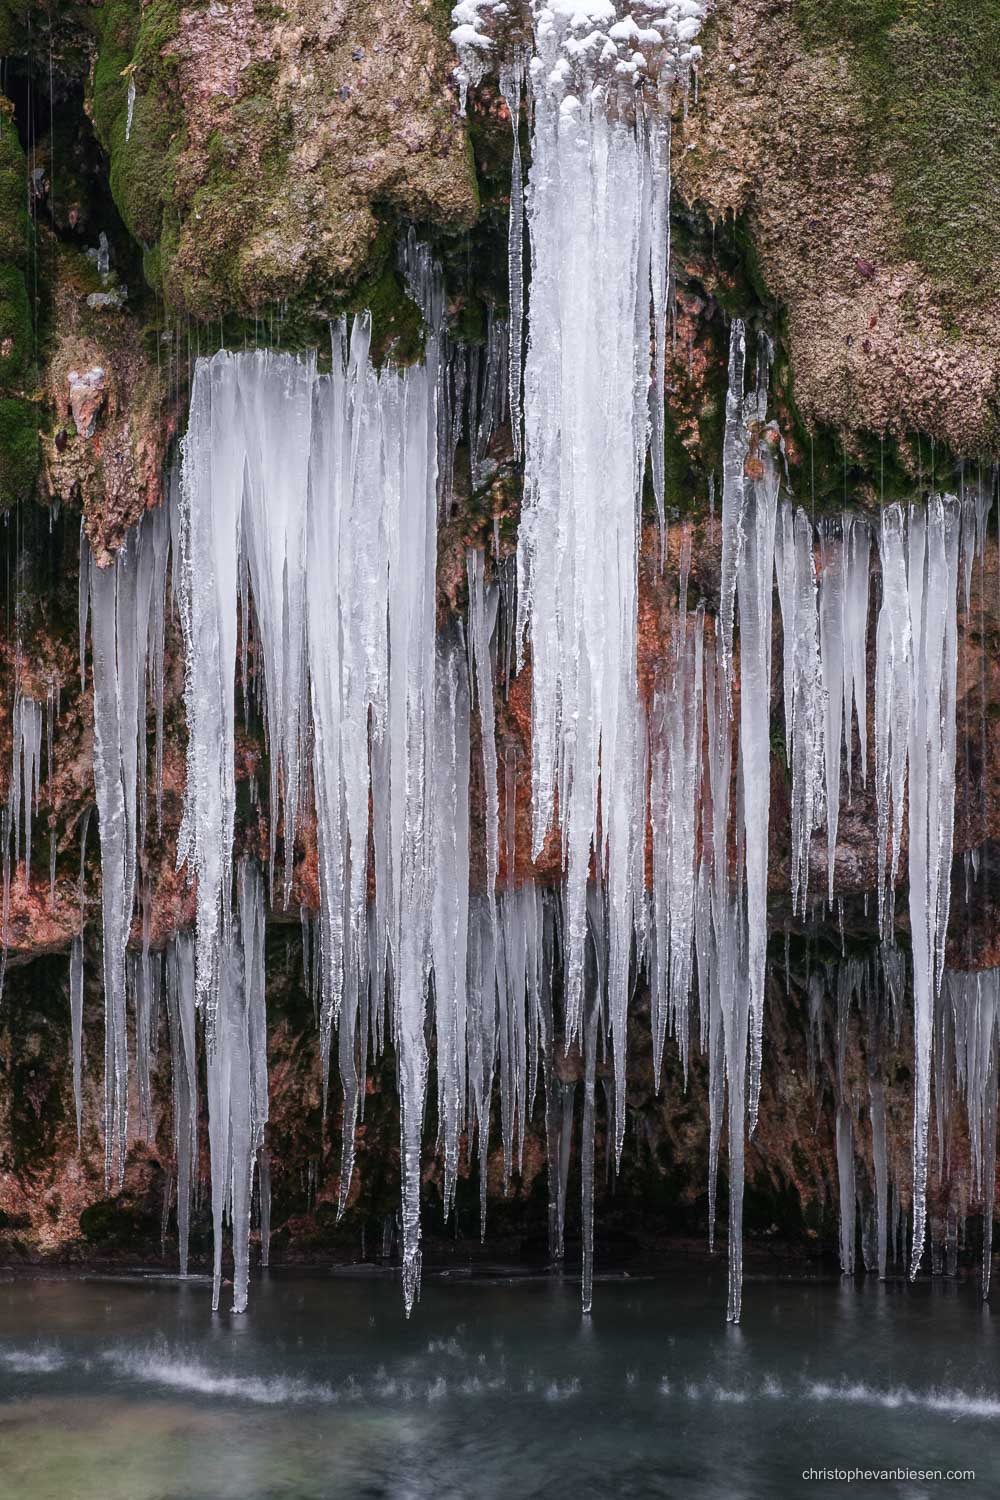 Visit the Mullerthal - Luxembourg - Frozen waterfall in Luxembourg's Mullerthal region during a very cold winter - Deep Frost